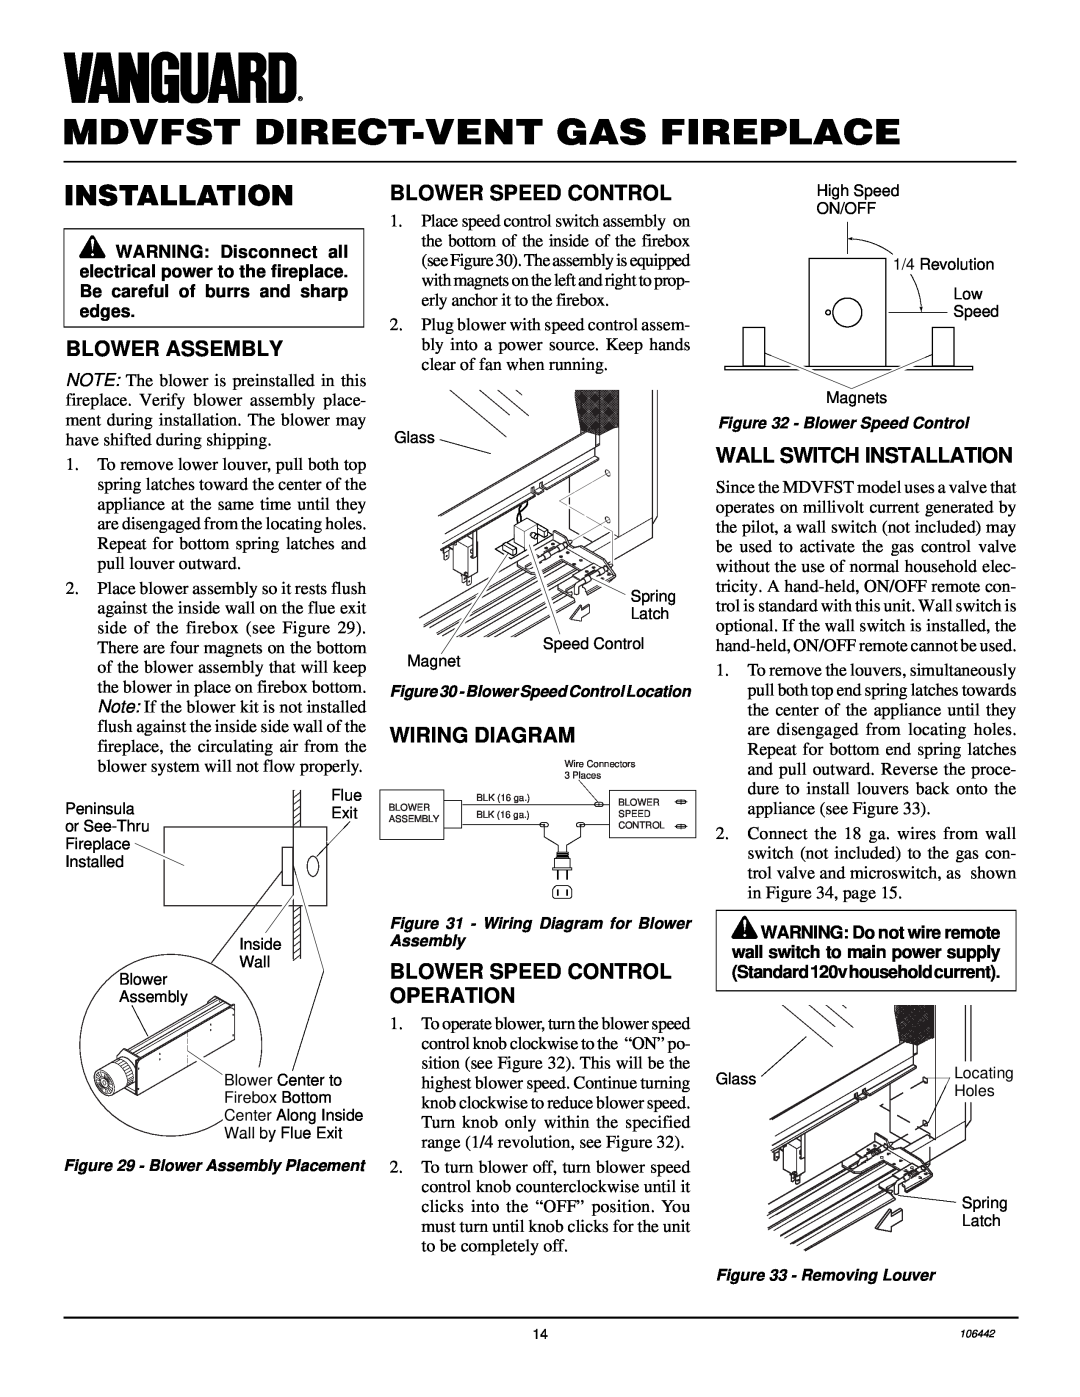 Desa MDVFST Blower Assembly, Wiring Diagram, Blower Speed Control Operation, Wall Switch Installation 